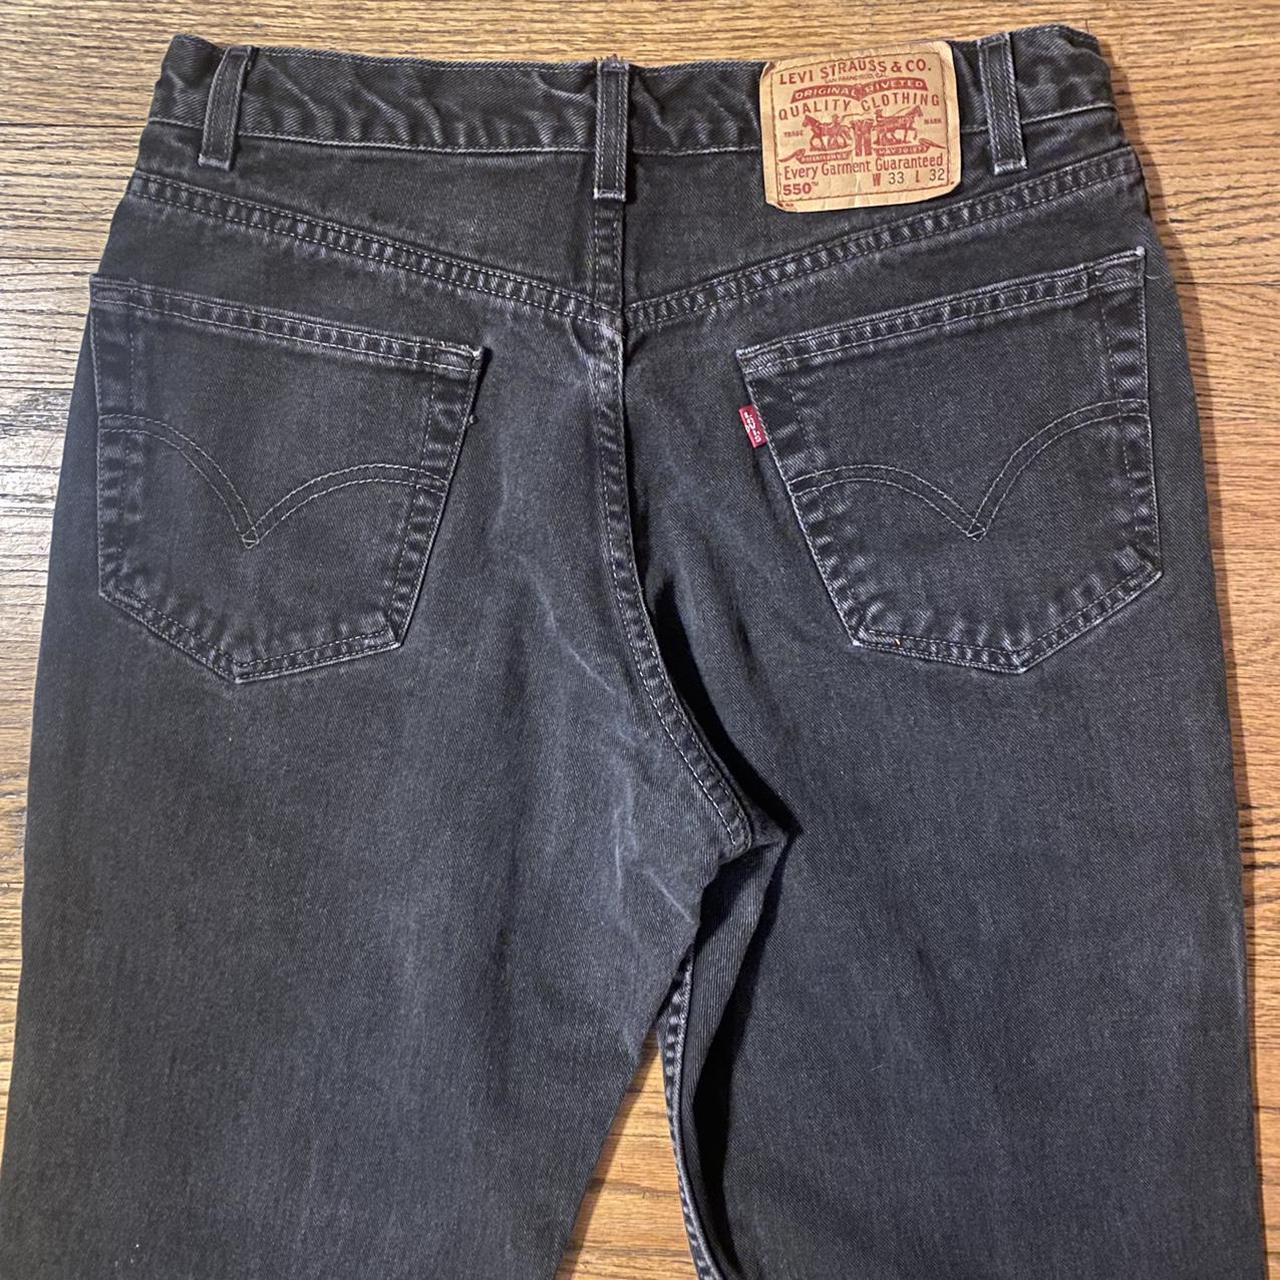 Product Image 2 - Vintage Levi’s 550 relaxed fit